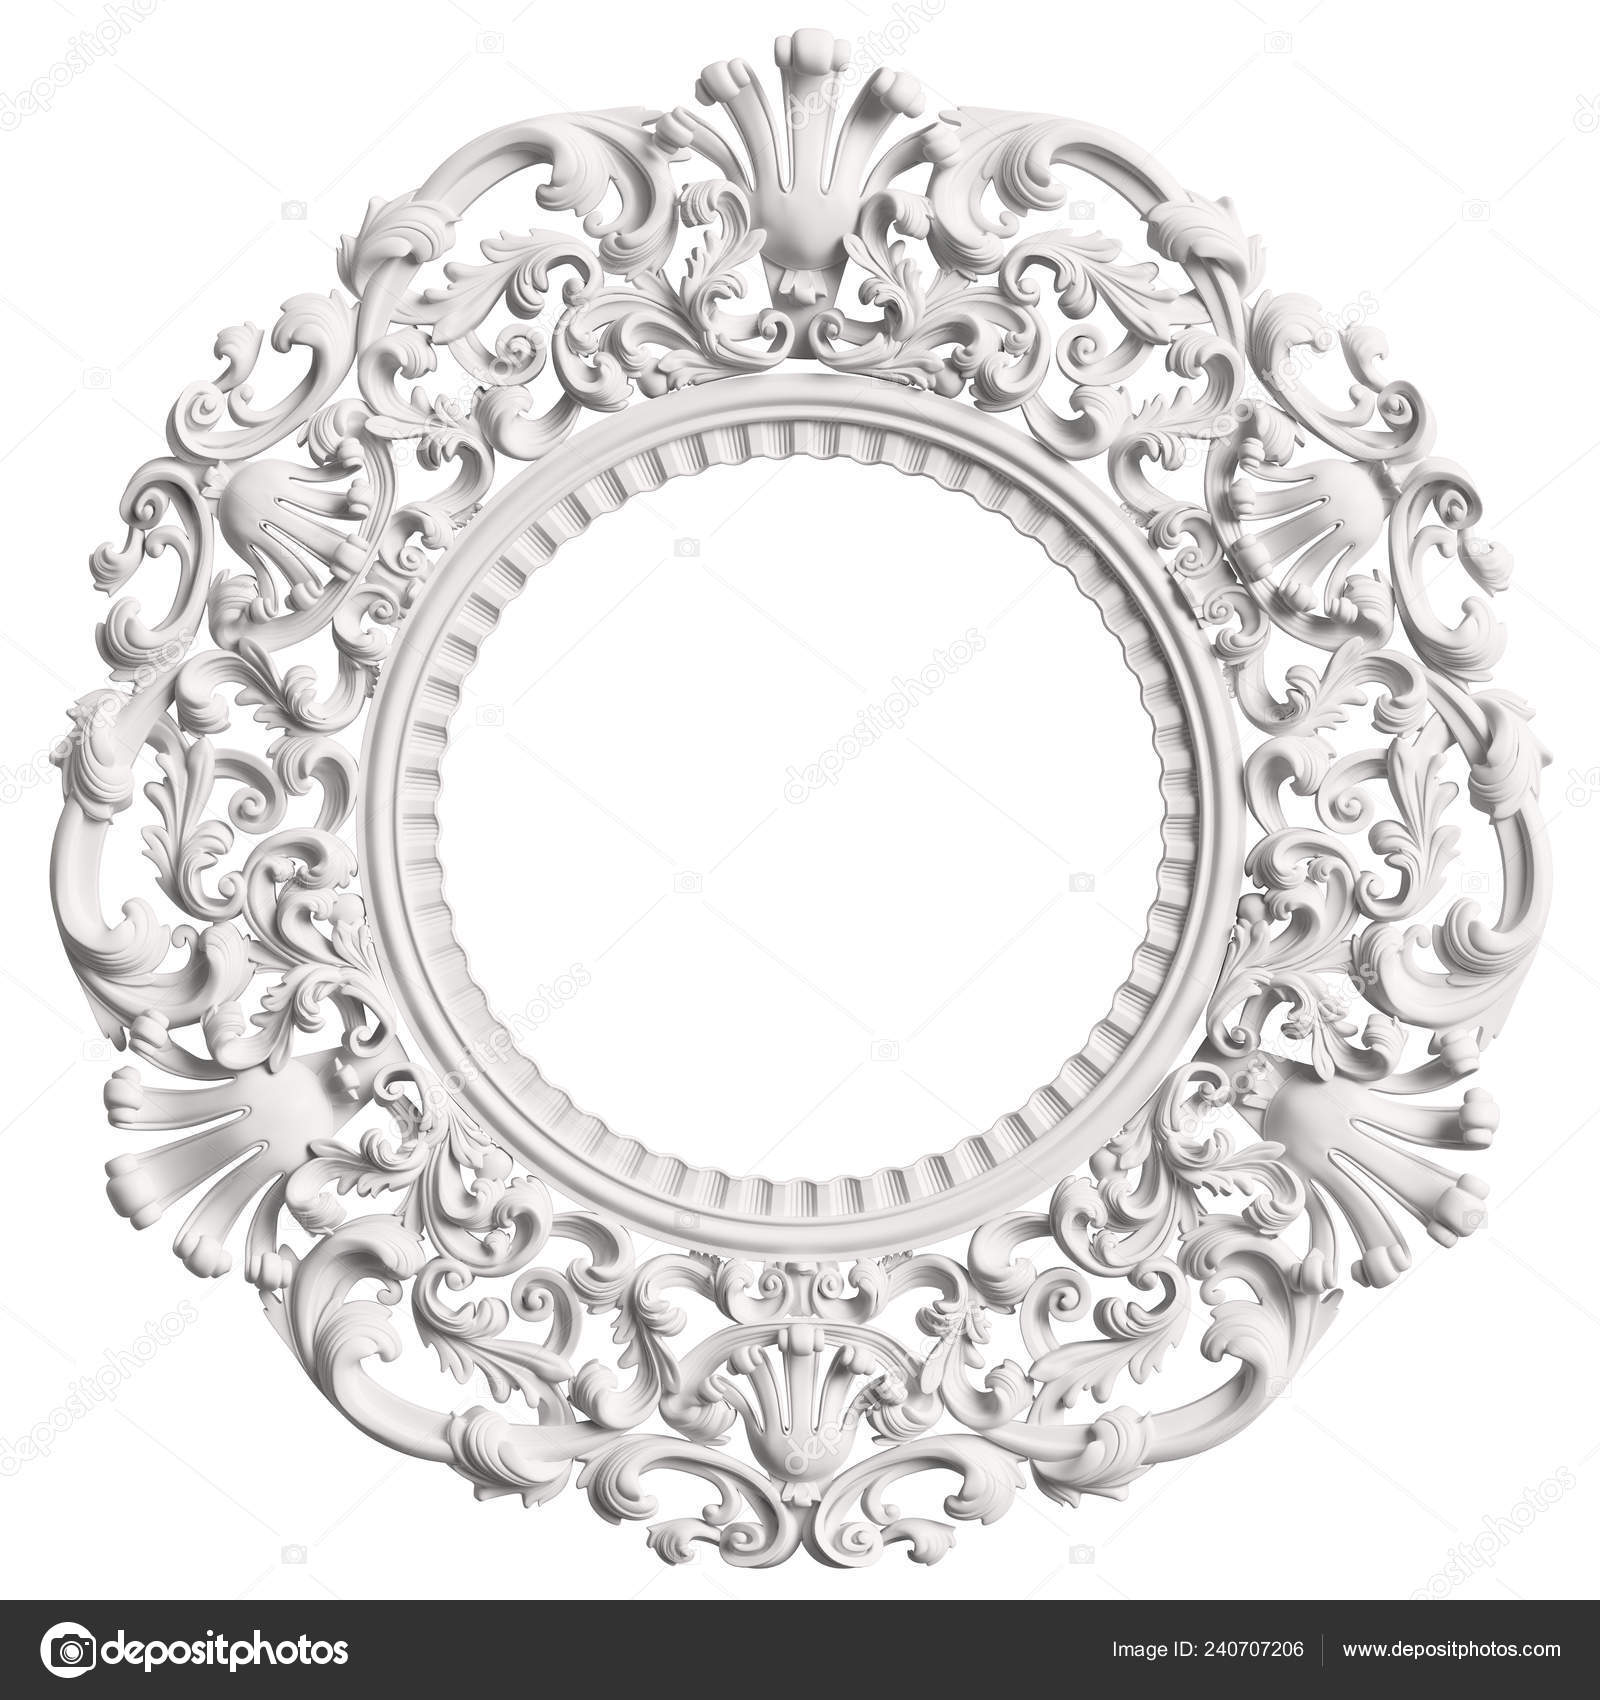 3,297,991 Vintage White Frame Images, Stock Photos, 3D objects